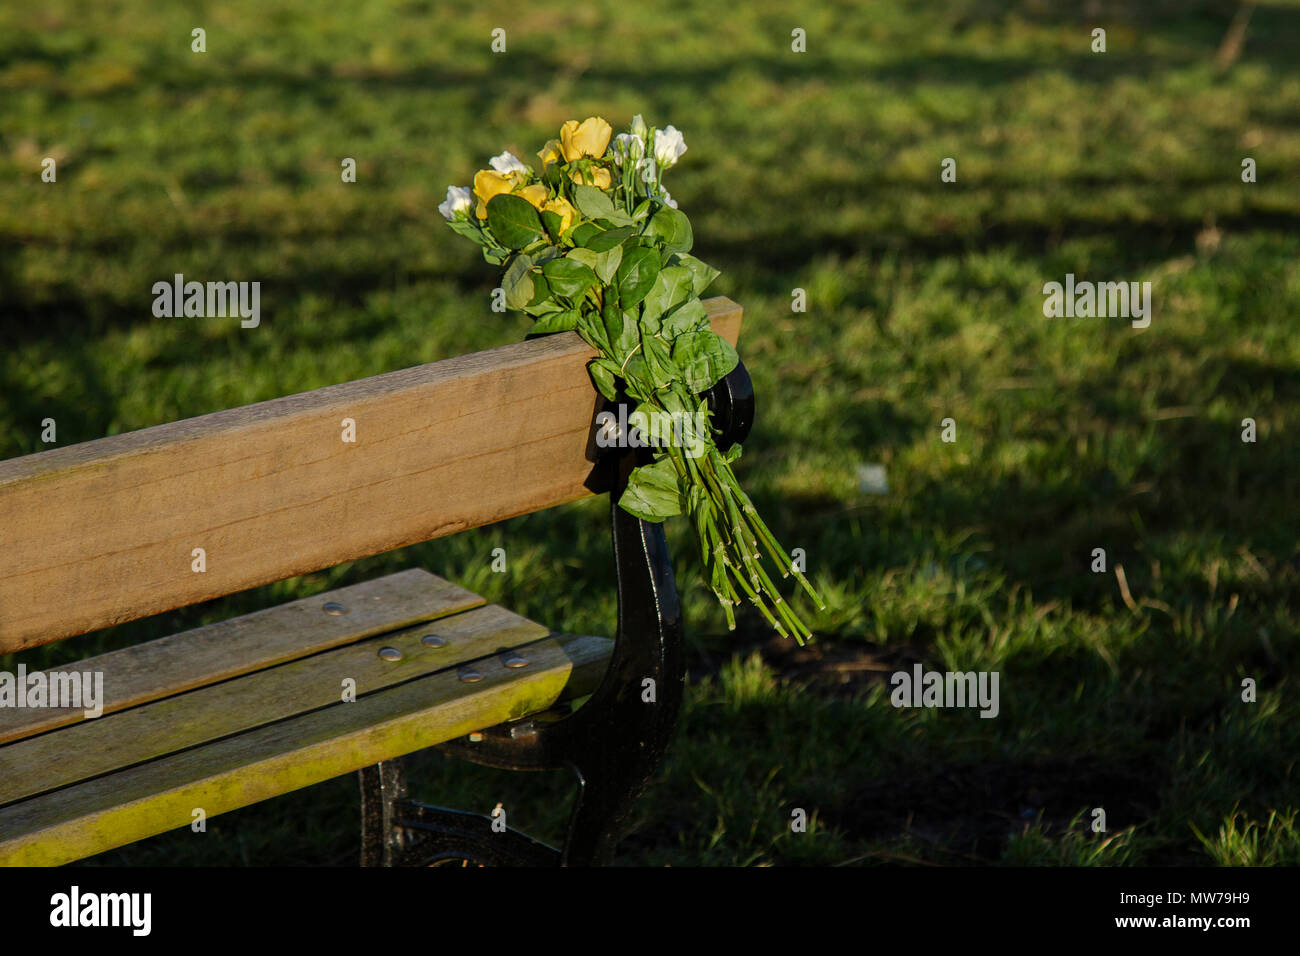 A bunch of flowers have been tied to a wooden bench in memory of a loved one. Stock Photo